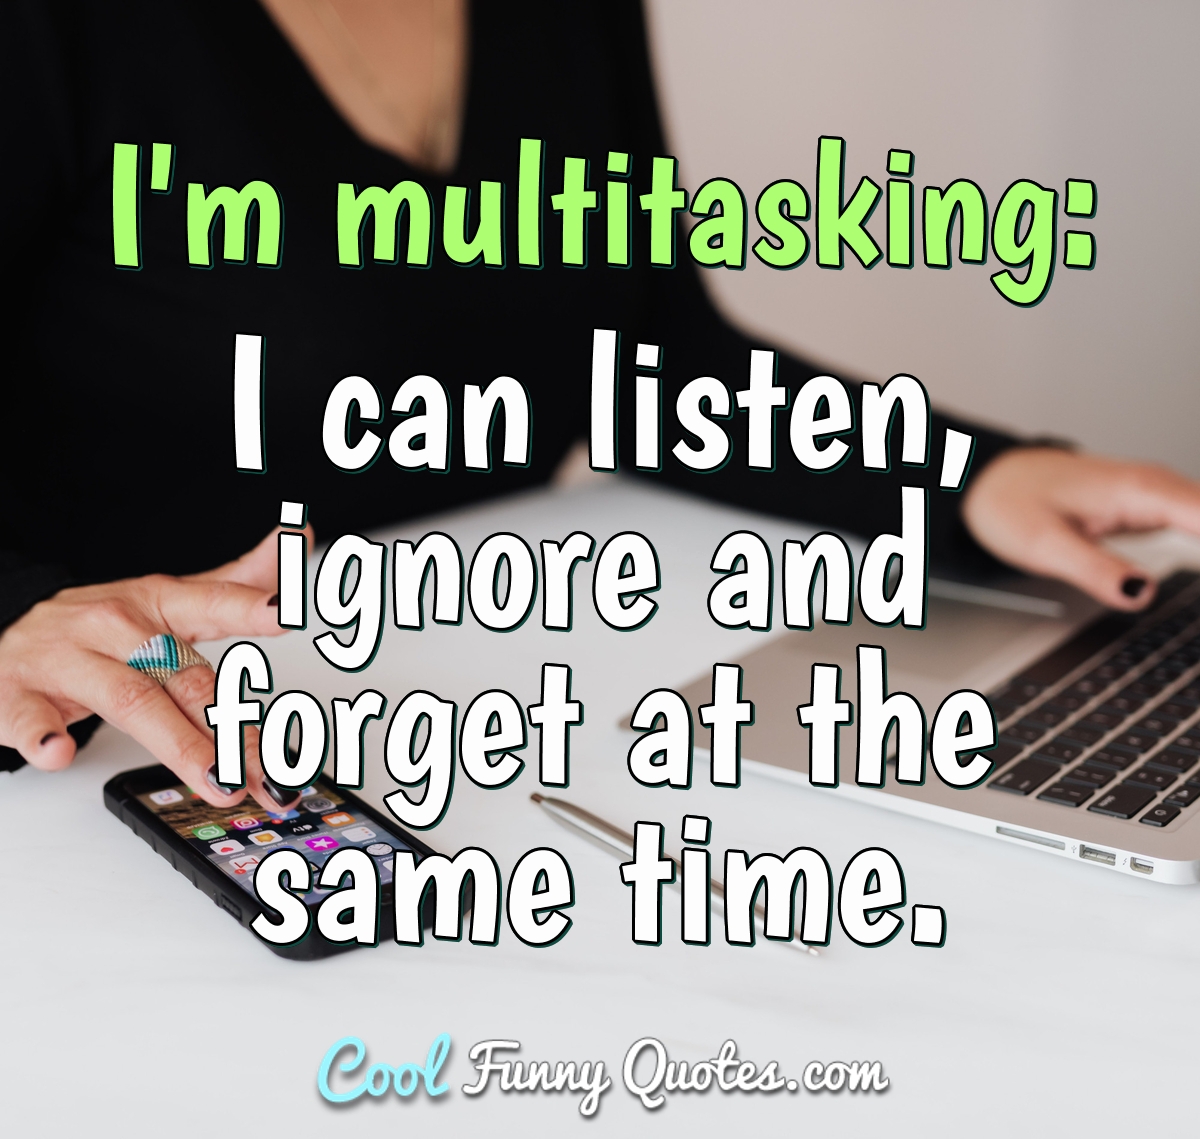 I'm multitasking: I can listen, ignore and forget at the same time.